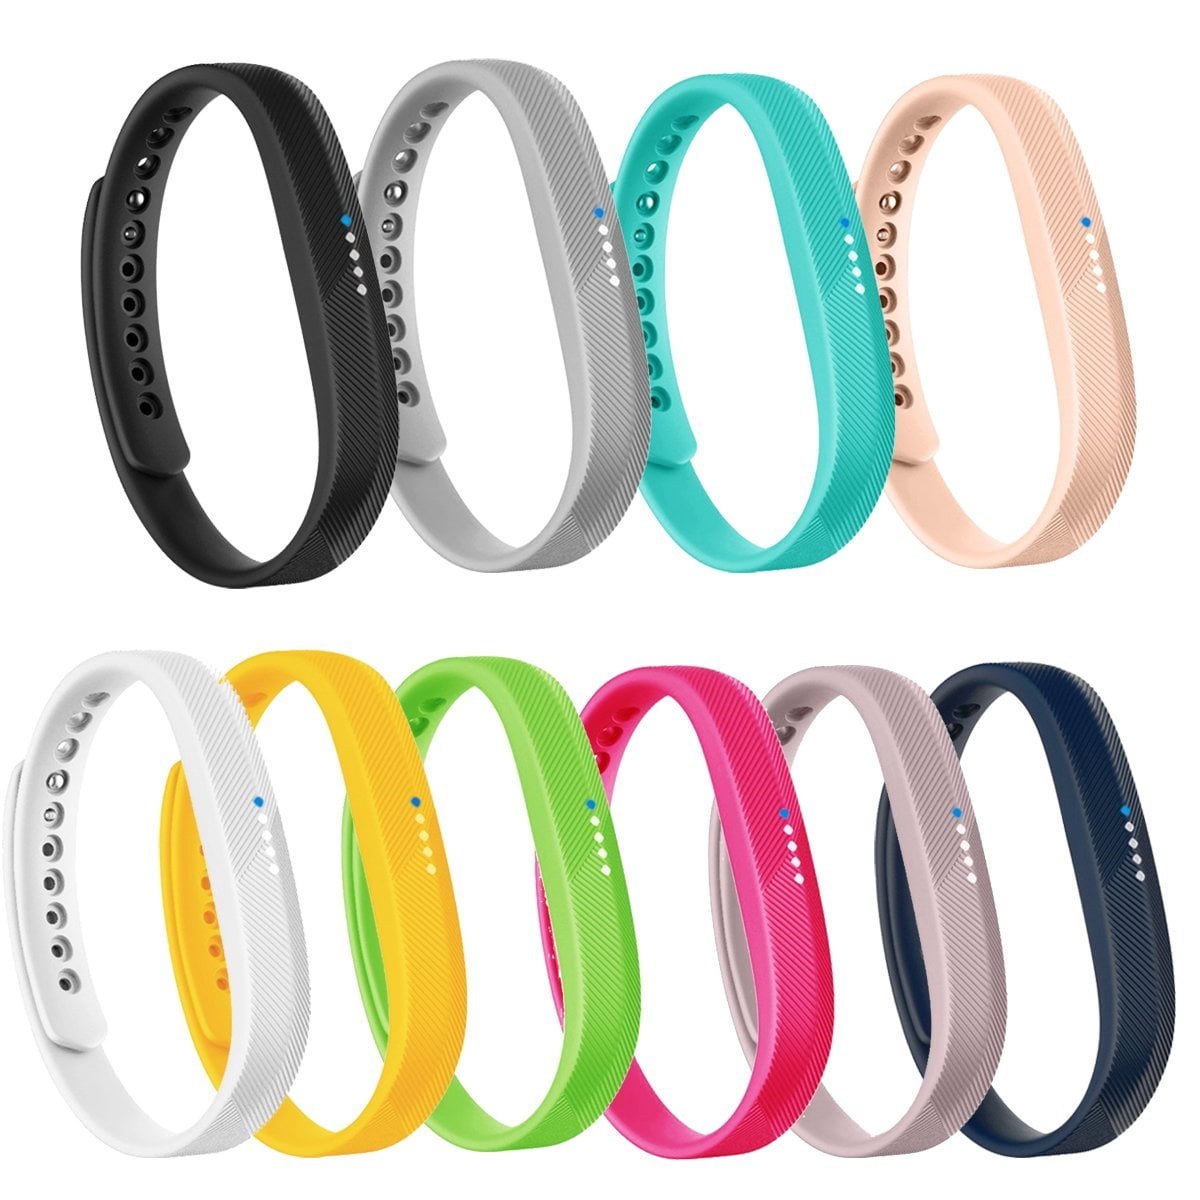 Multi-color Replacement Wrist Band With Clasp For Fitbit Flex Wristband Small US 